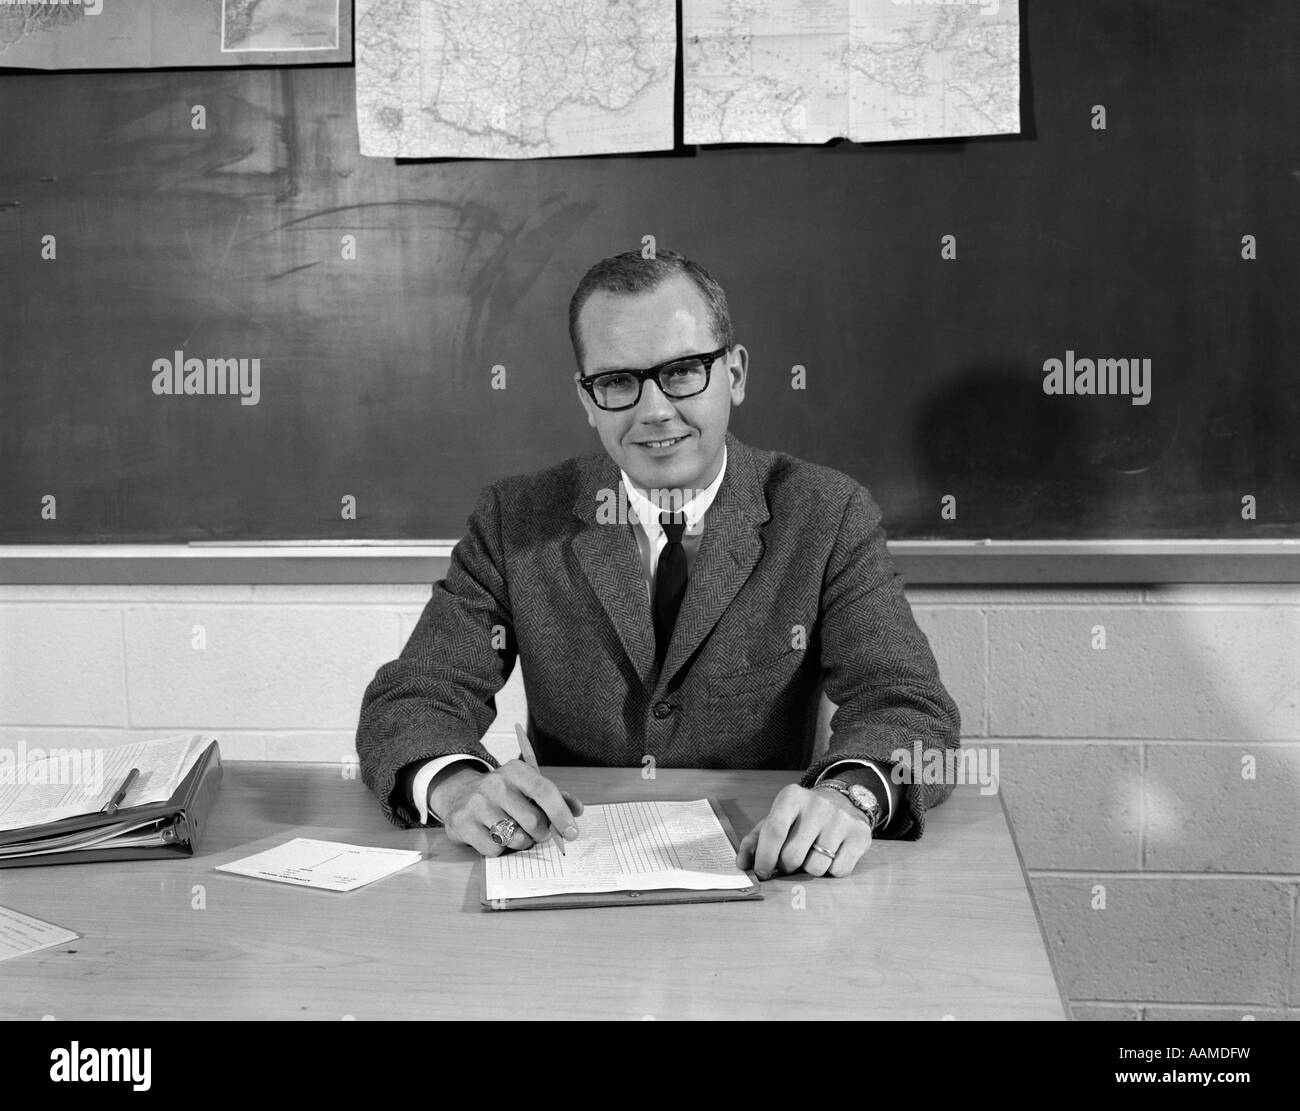 1960s MAN TEACHER AT DESK IN CLASSROOM PENCIL PAPER IN FRONT BLACKBOARD BACKGROUND SMILING AT CAMERA Stock Photo